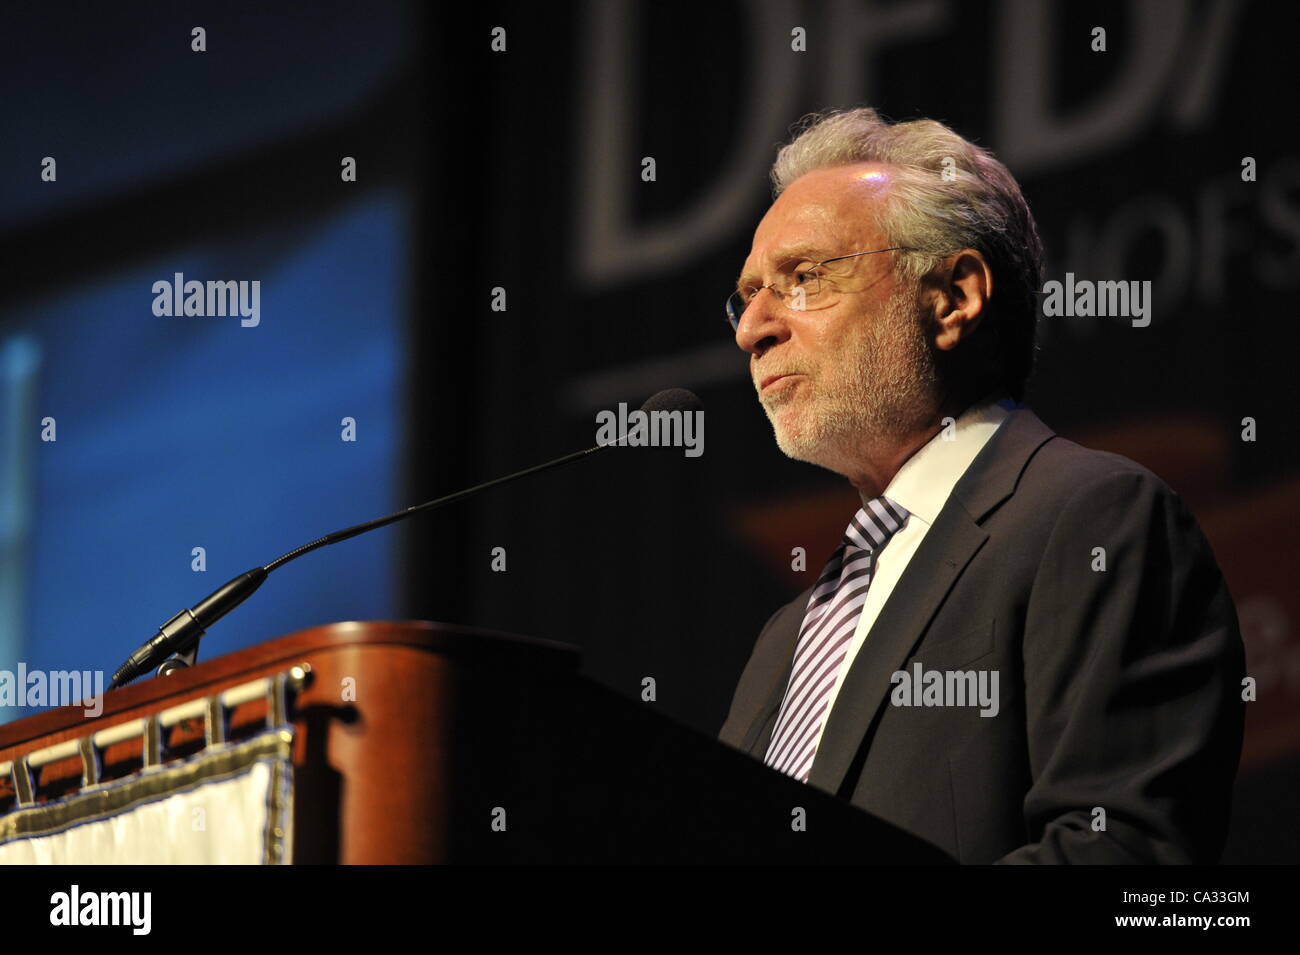 Wolf Blitzer, anchor of CNN’s The Situation Room, speaking at Hofstra University on Thursday, March 29, 2012, in Hempstead, New York, USA. During Blitzer's talk, he shared news clips, including from CNN presidential primary debates he moderated. Hofstra's "The World Today" event is part of “Debate 2 Stock Photo